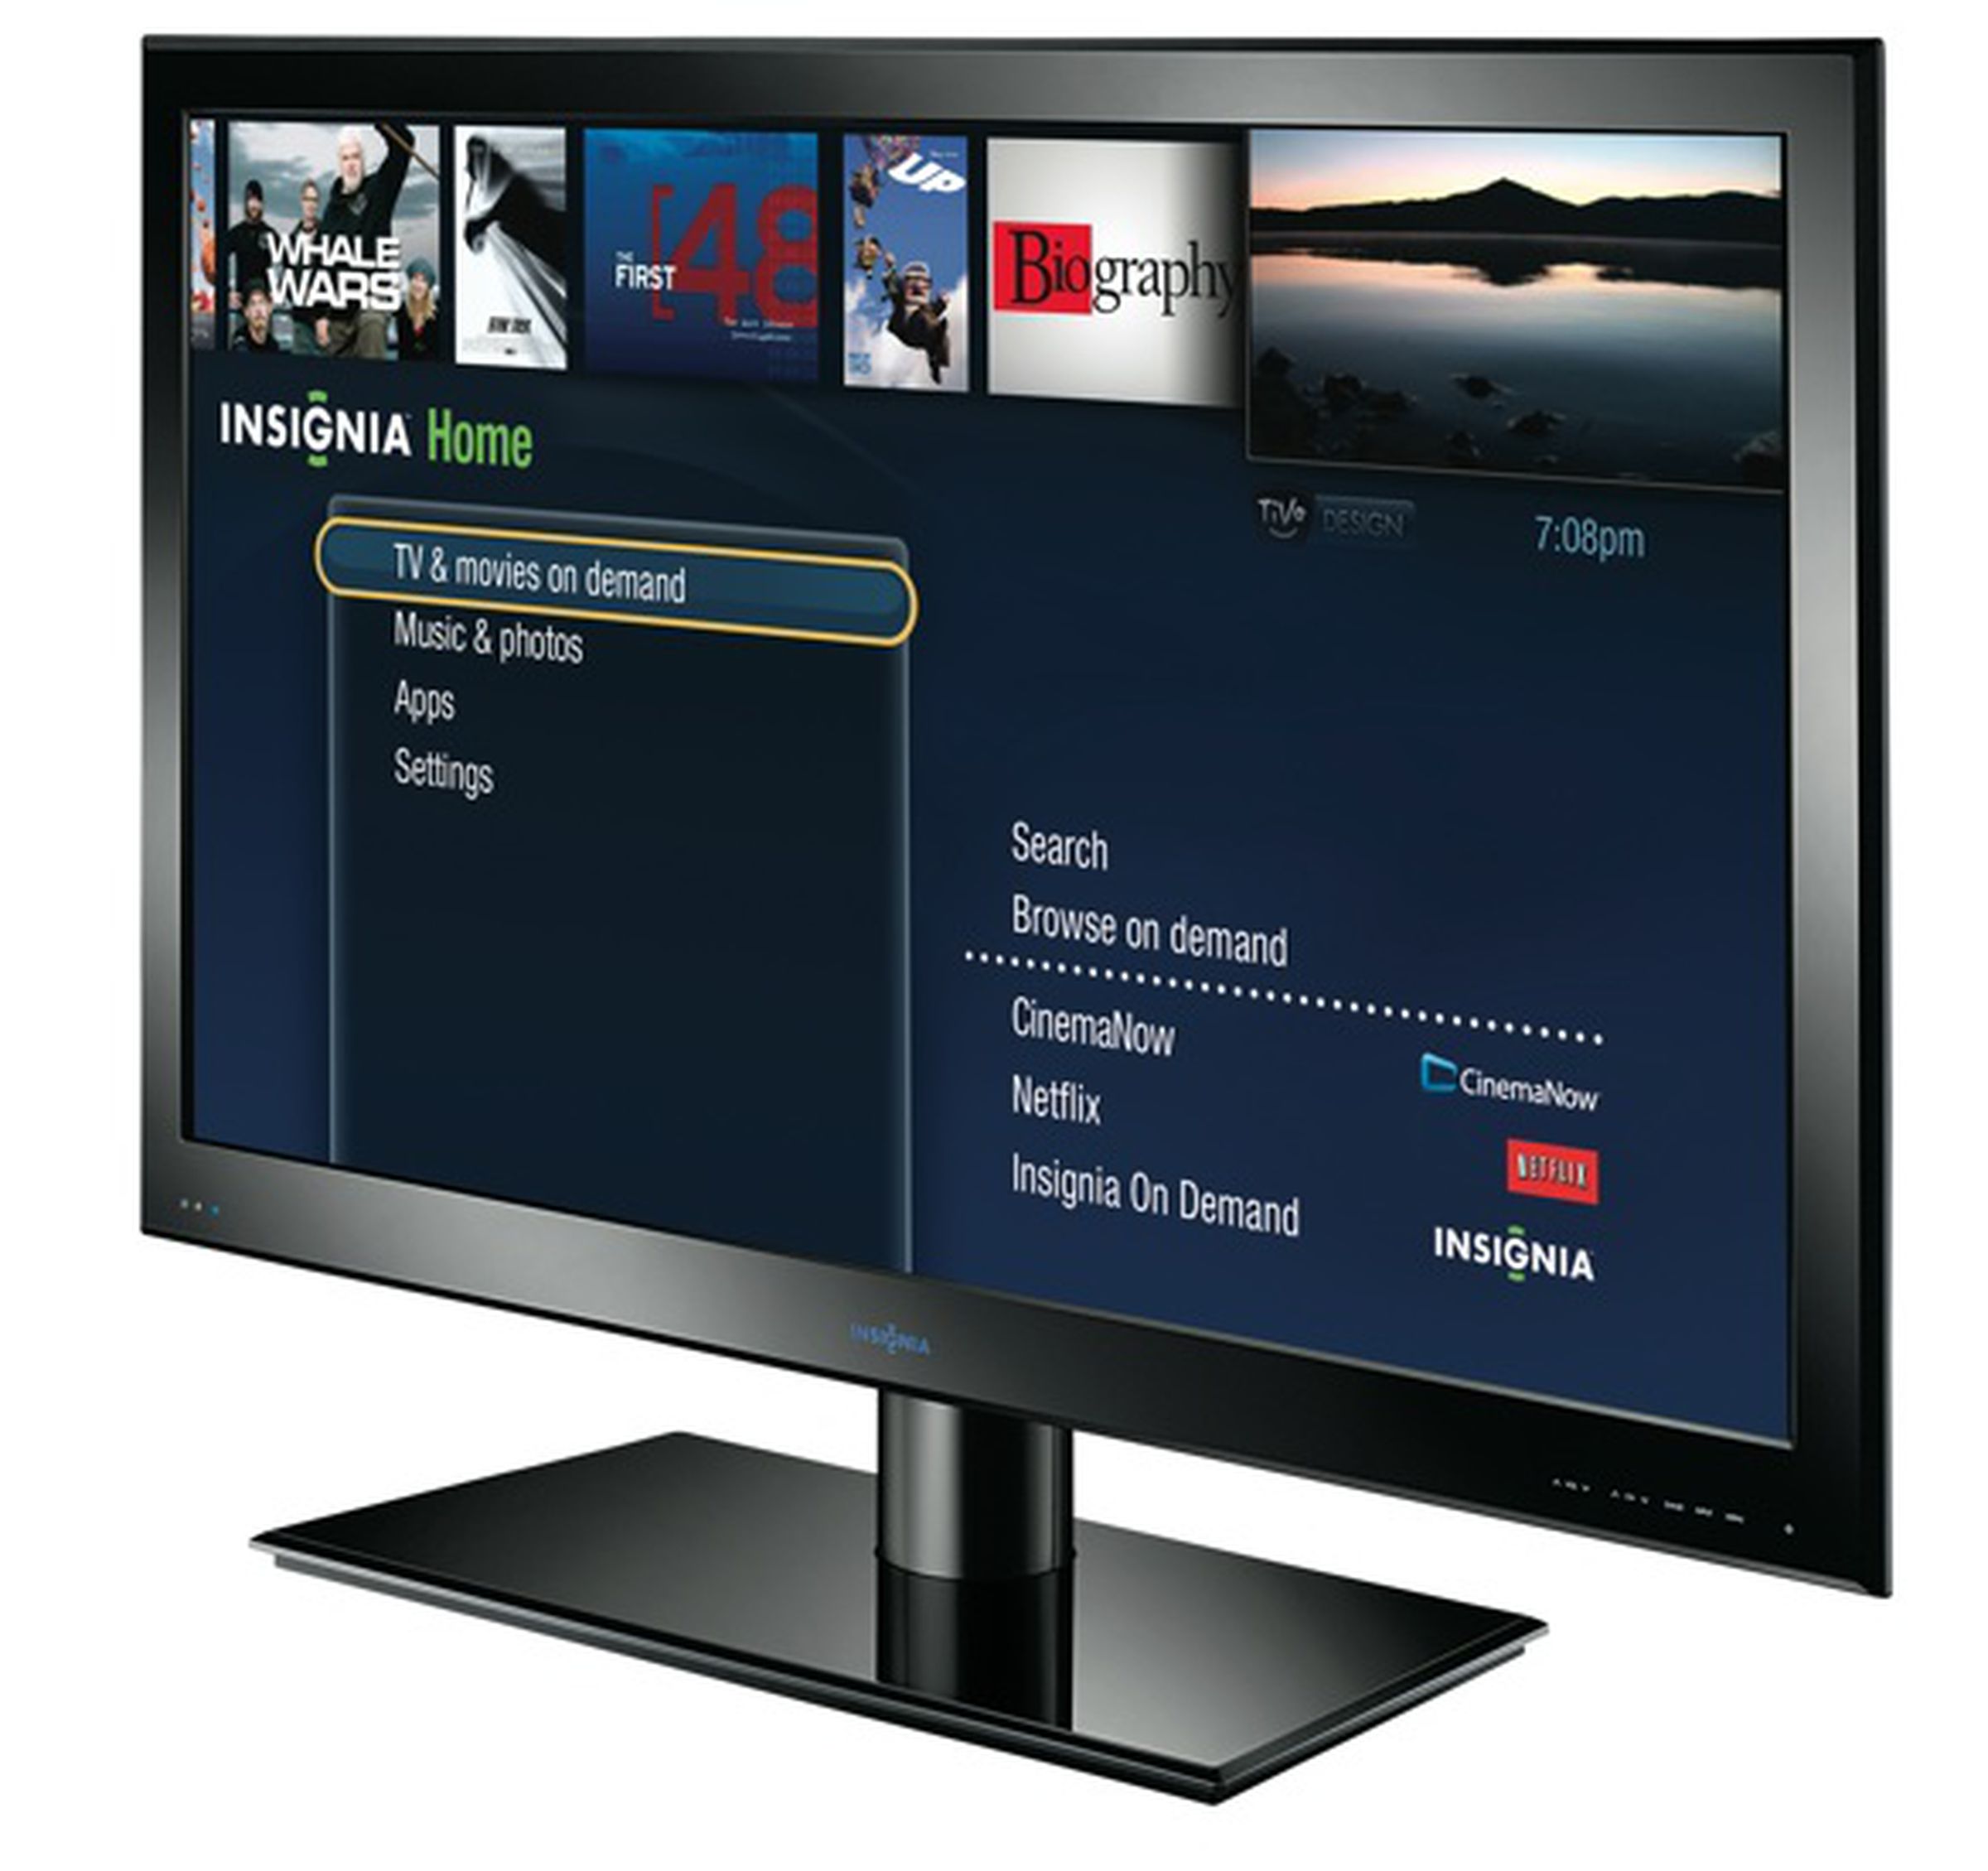 Best Buy announces Insignia Connected TV with TiVo-powered interface